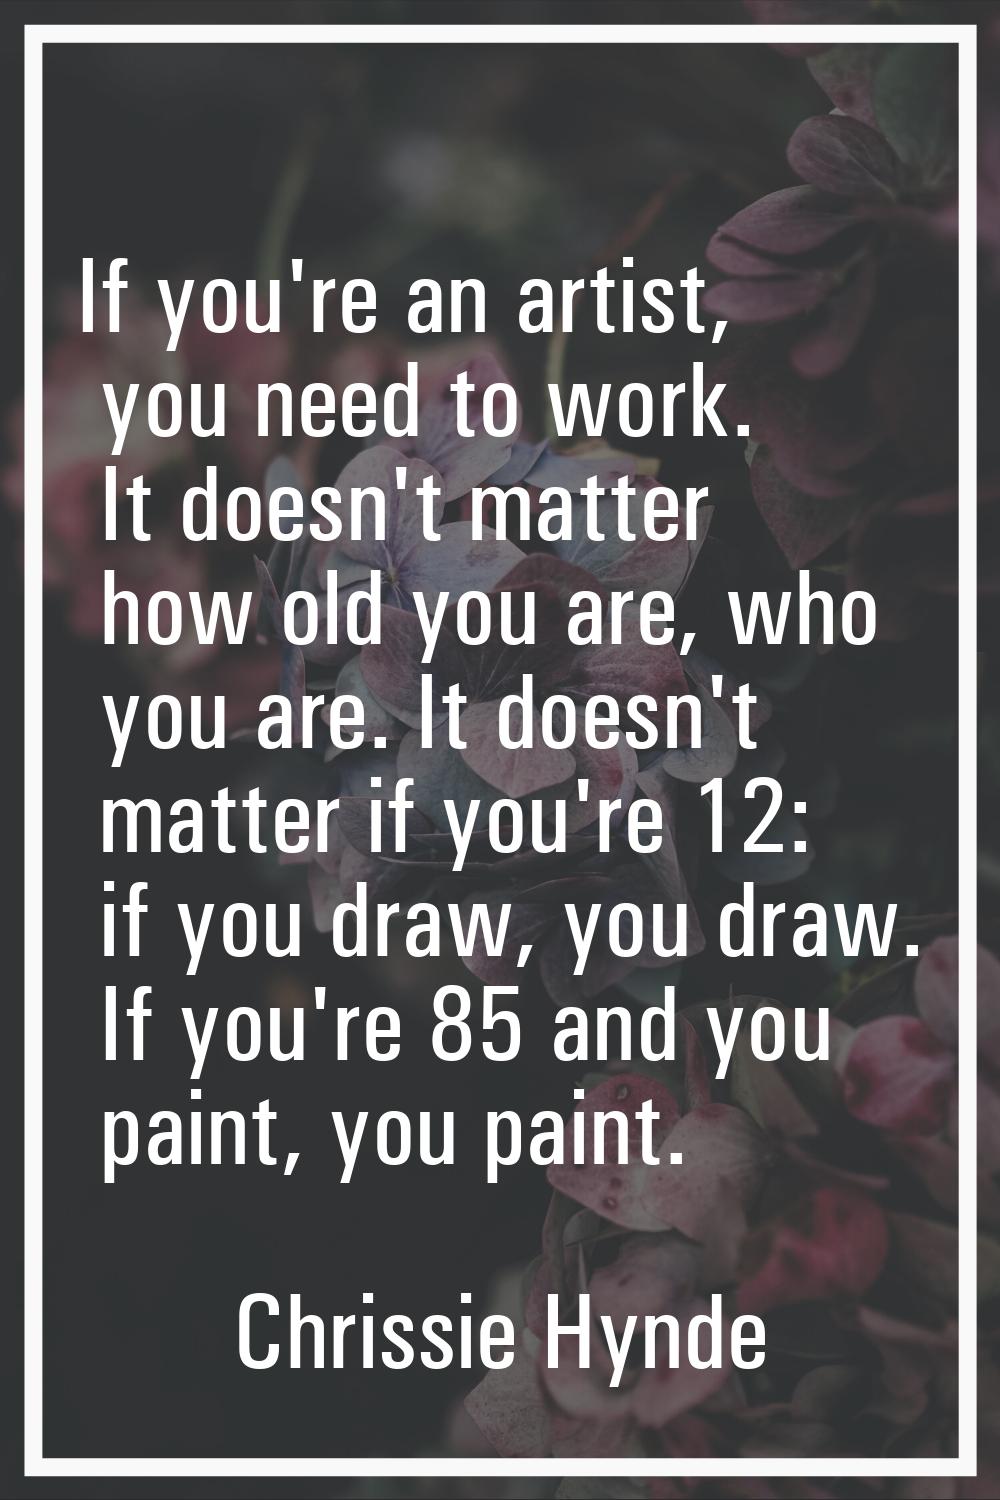 If you're an artist, you need to work. It doesn't matter how old you are, who you are. It doesn't m